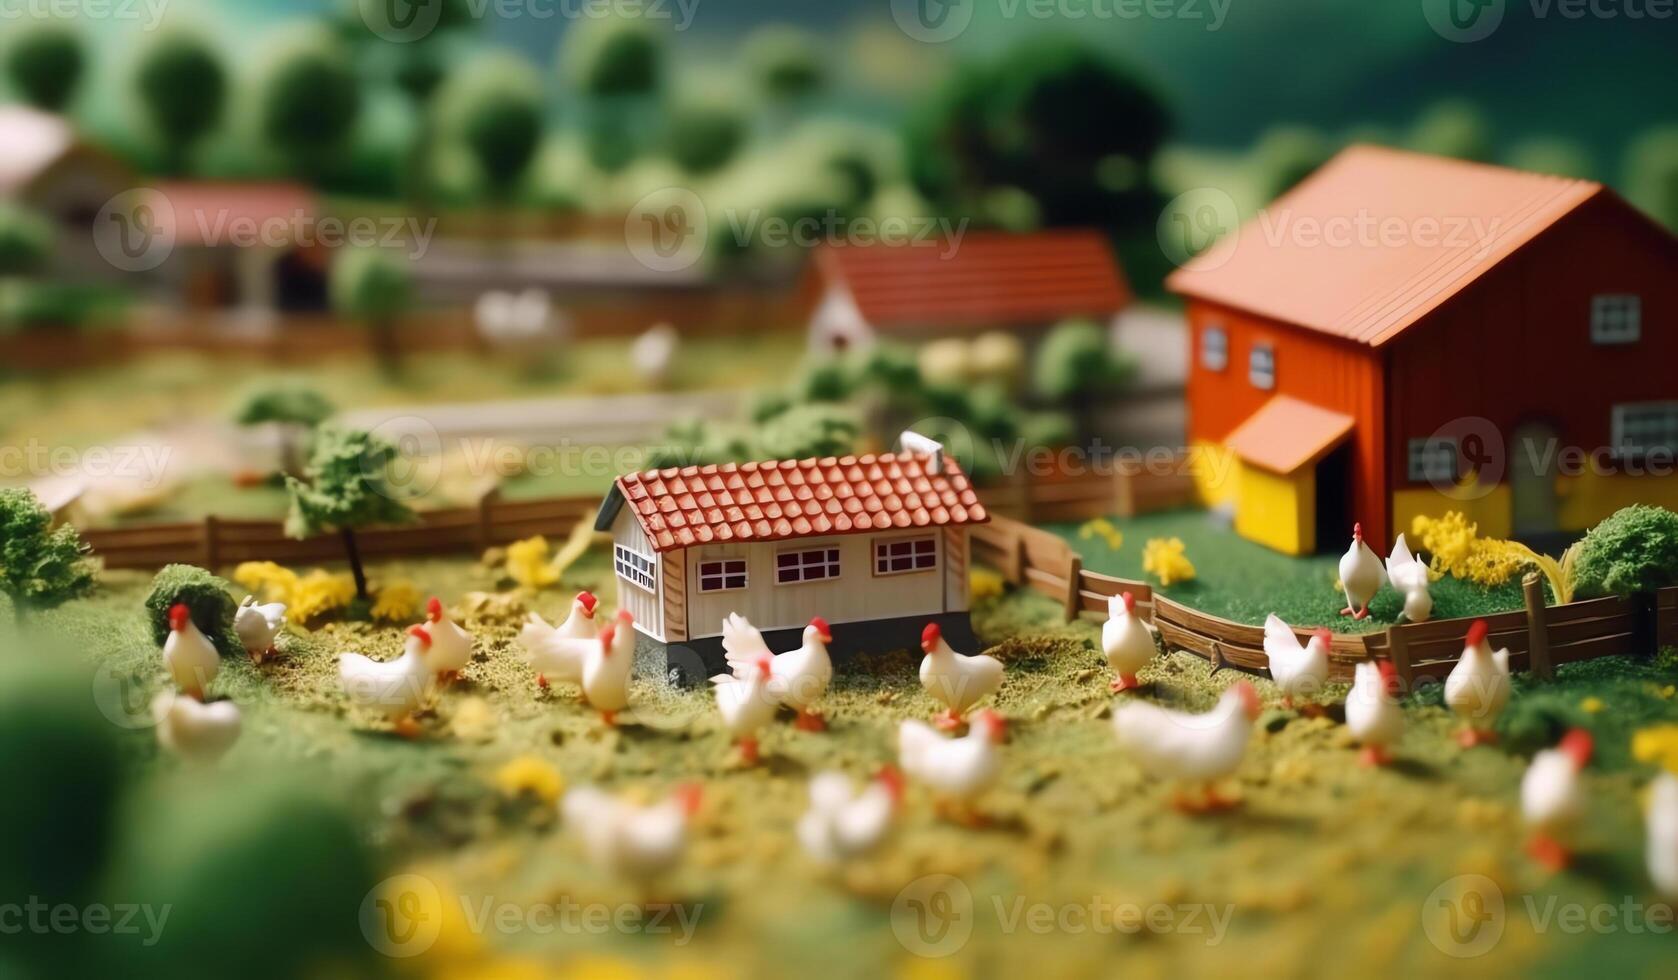 . Miniature Clay World Super Cute Freeze Frame Animation. Poultry Farming and Agricultural Machinery in Tilt Shift Landscape. Excellent Lighting Enhances Volume with Brush Rendering. photo